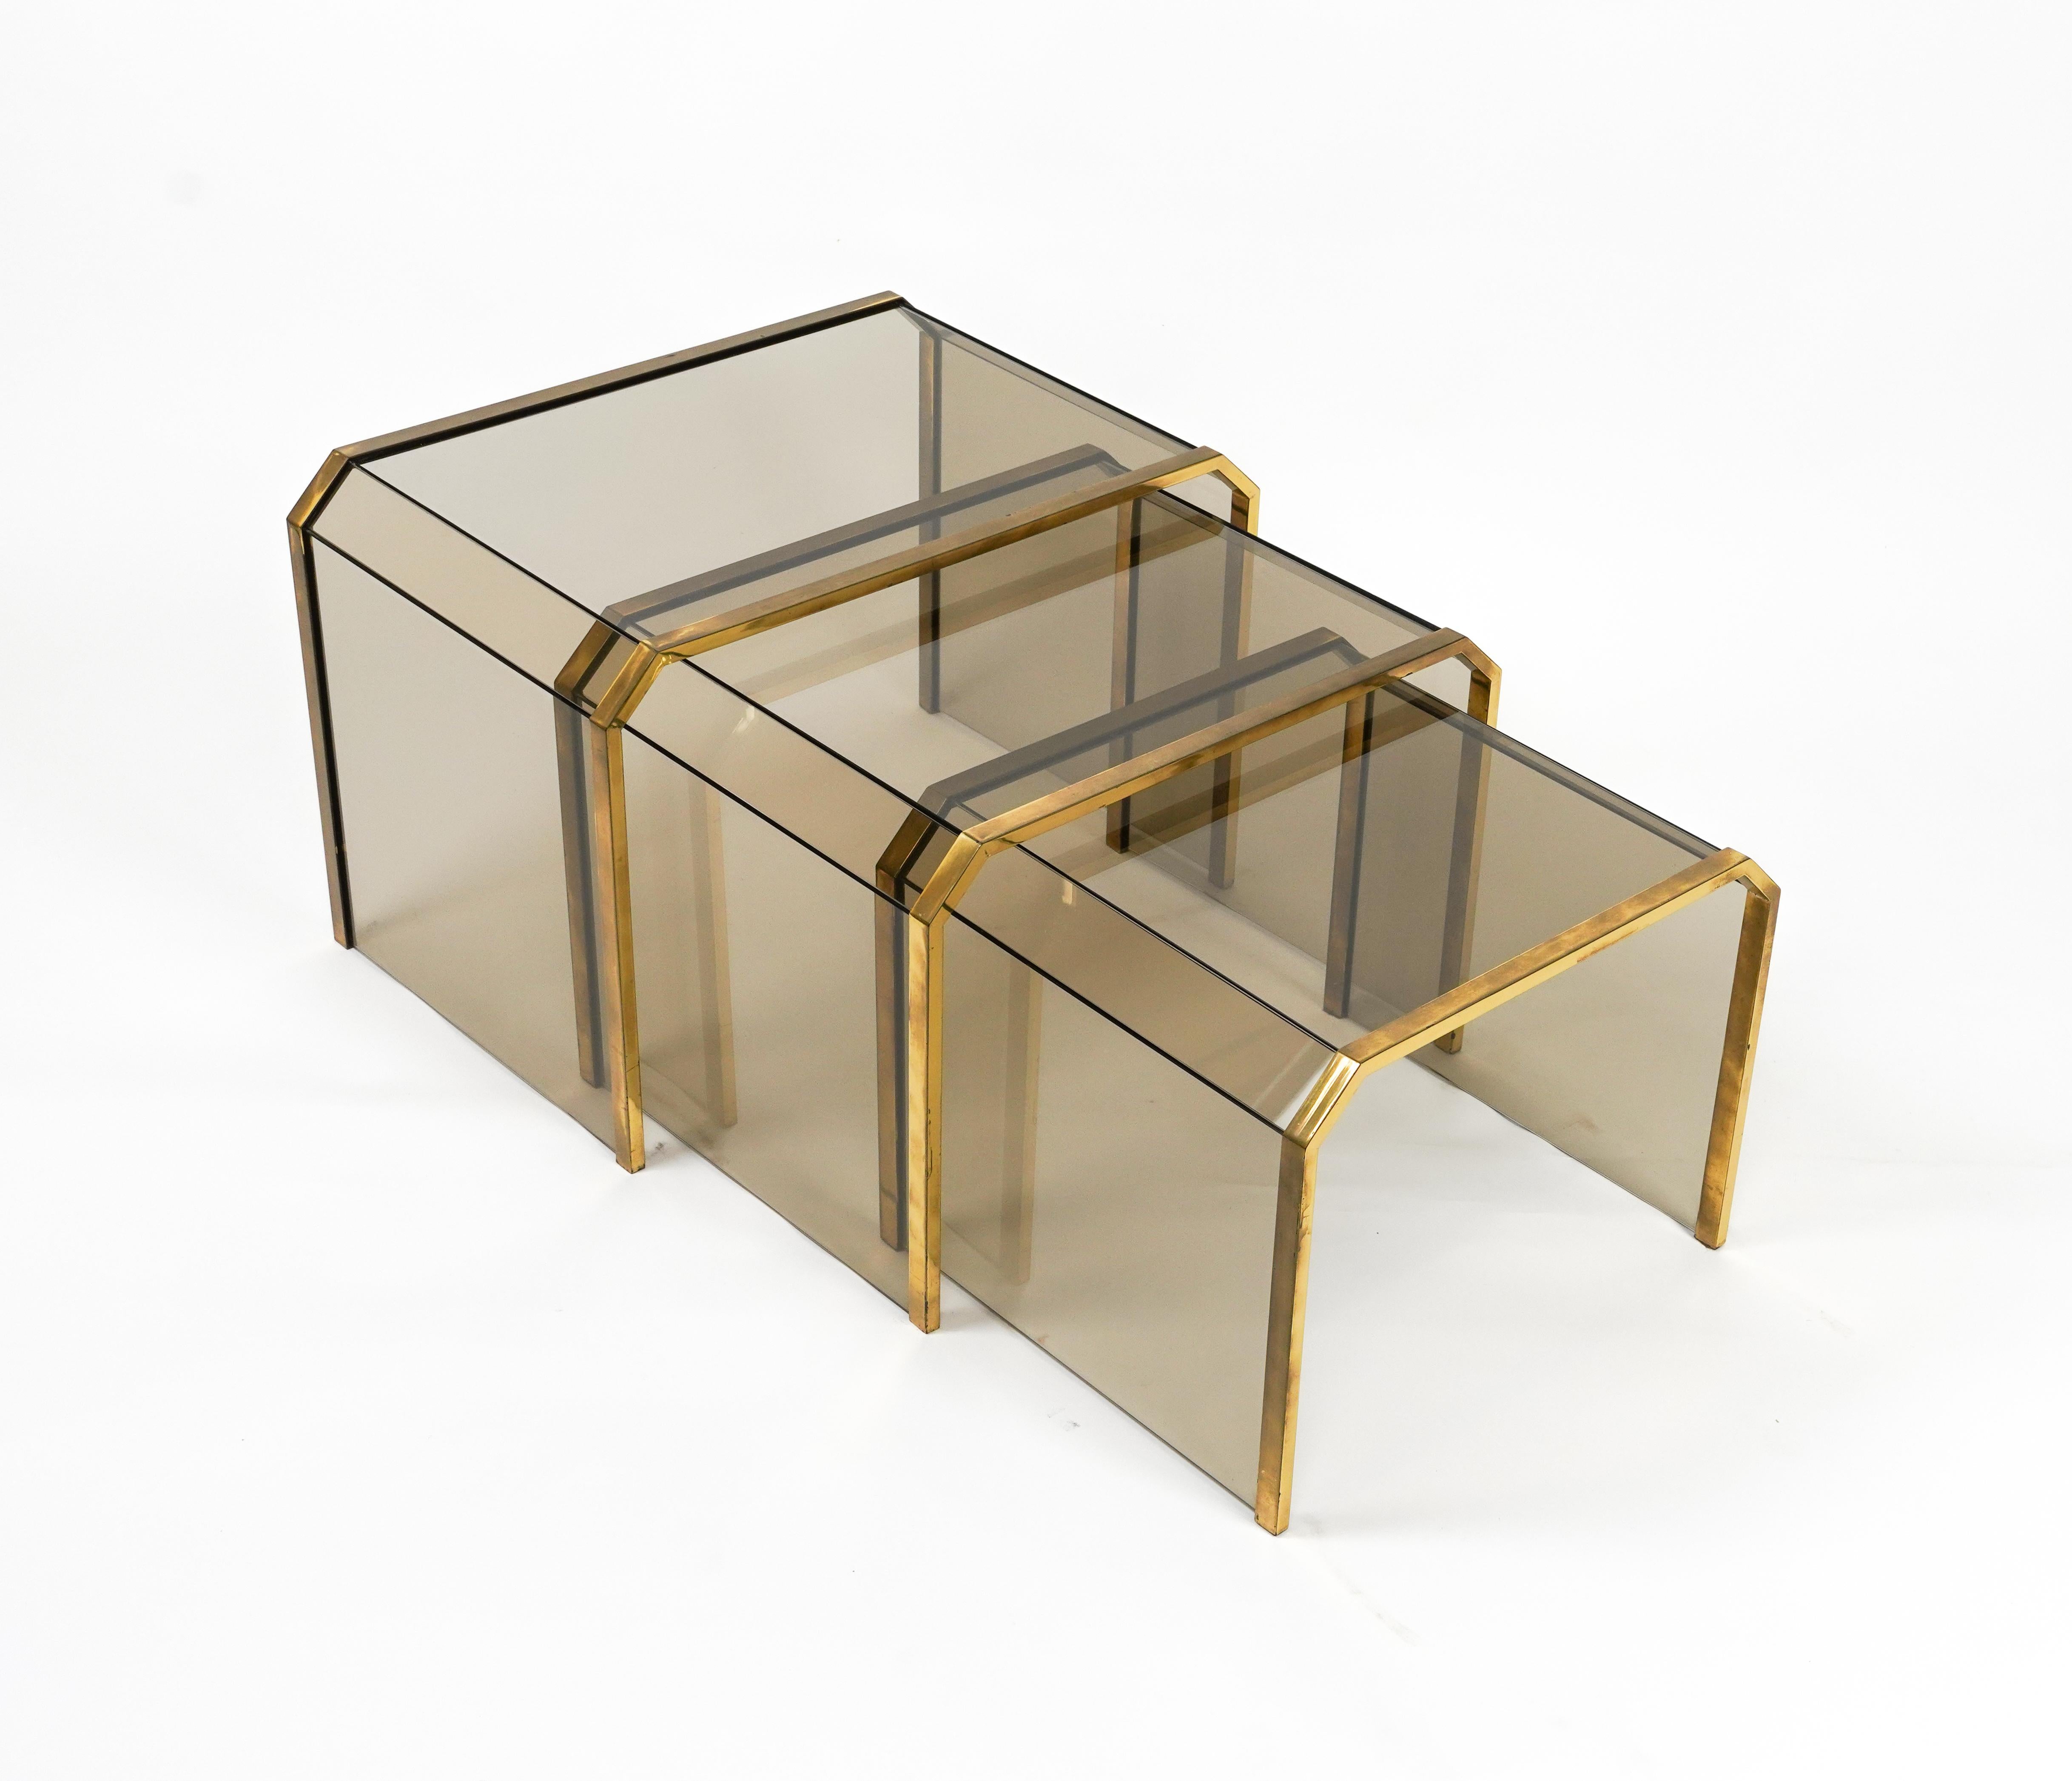 Midecentury amazing set of three nesting table in brass and smoked glass in the style of Gallotti & Radice.

Made in Italy in the 1970s.

Dimensions:  
Biggest table: 40.5 H x 59.5 W x 39.5 D cm 
Middle table: 37.5 H x 52.5 W x 39.5 D cm 
Smallest